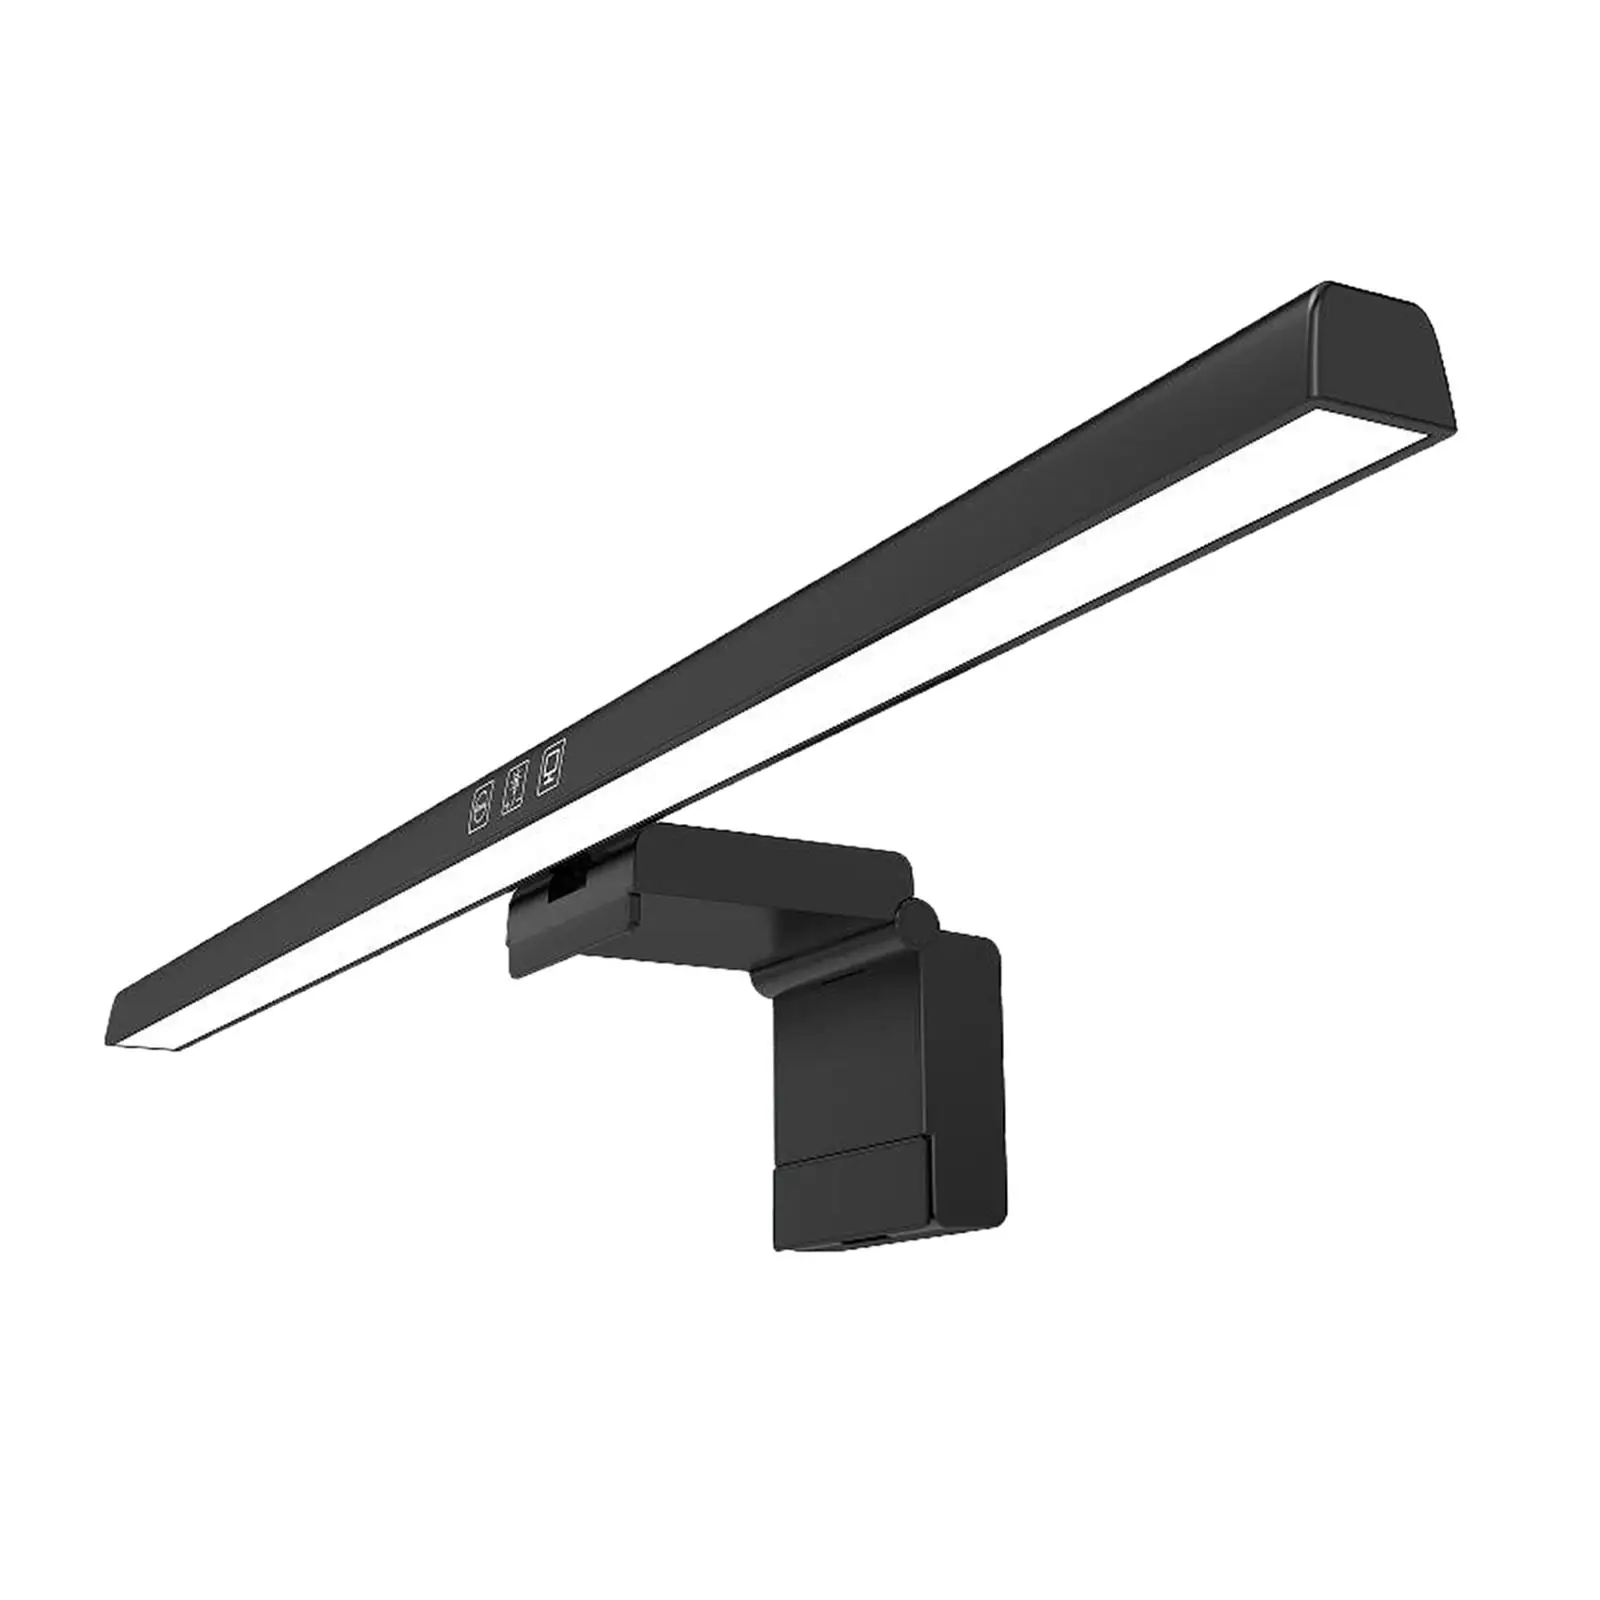 Computer Monitor Lamp Screen Hanging Monitor Fill Light Asymmetric Light Source Read Lamp for Dorm Desk Study Room Bedroom Cafe